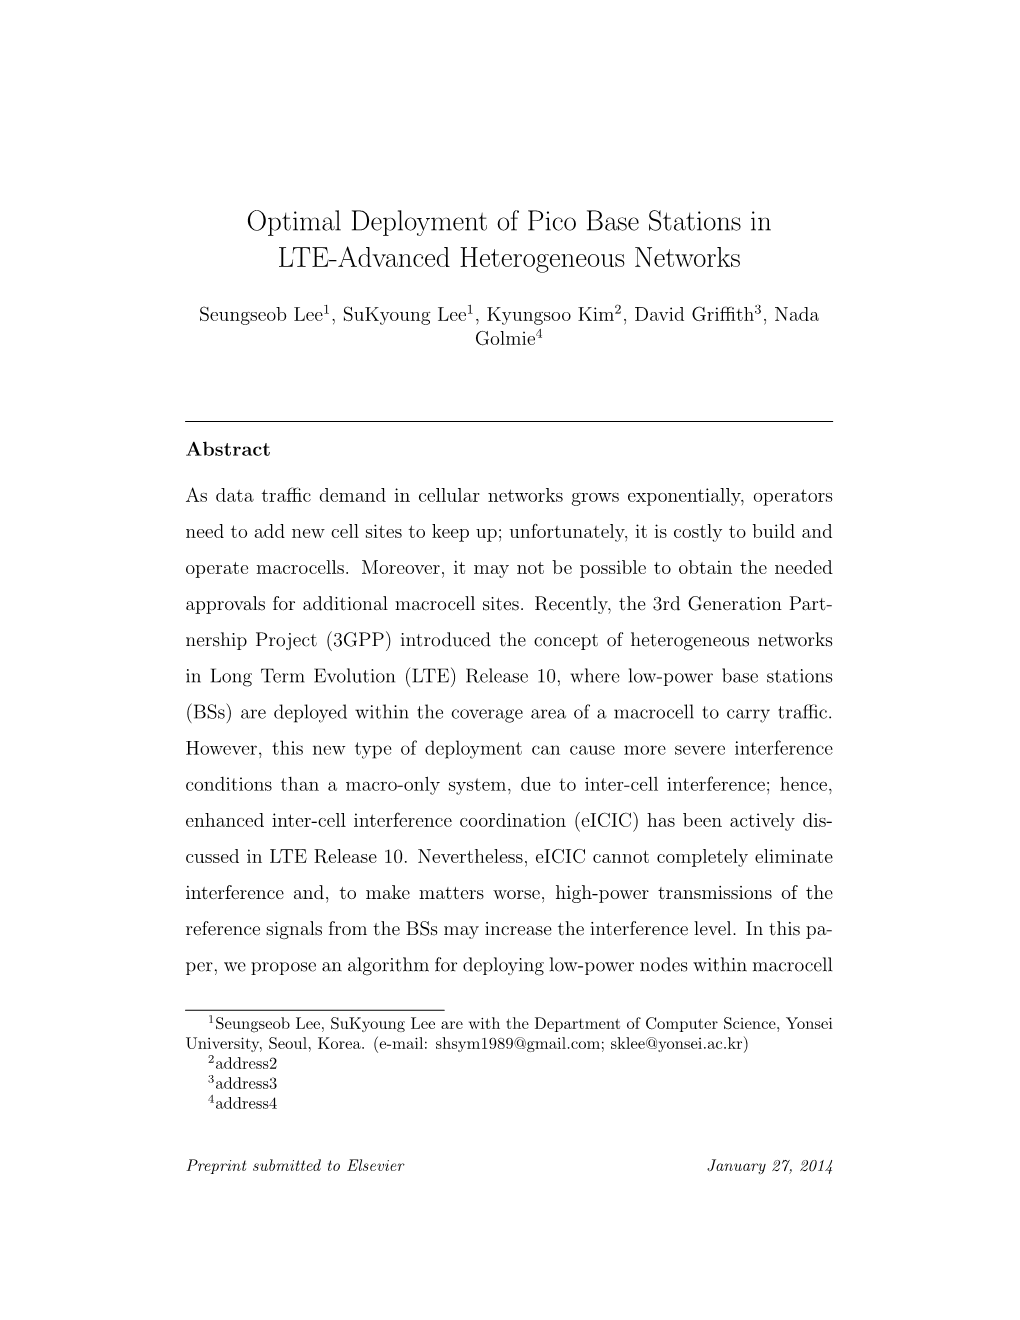 Optimal Deployment of Pico Base Stations in LTE-Advanced Heterogeneous Networks